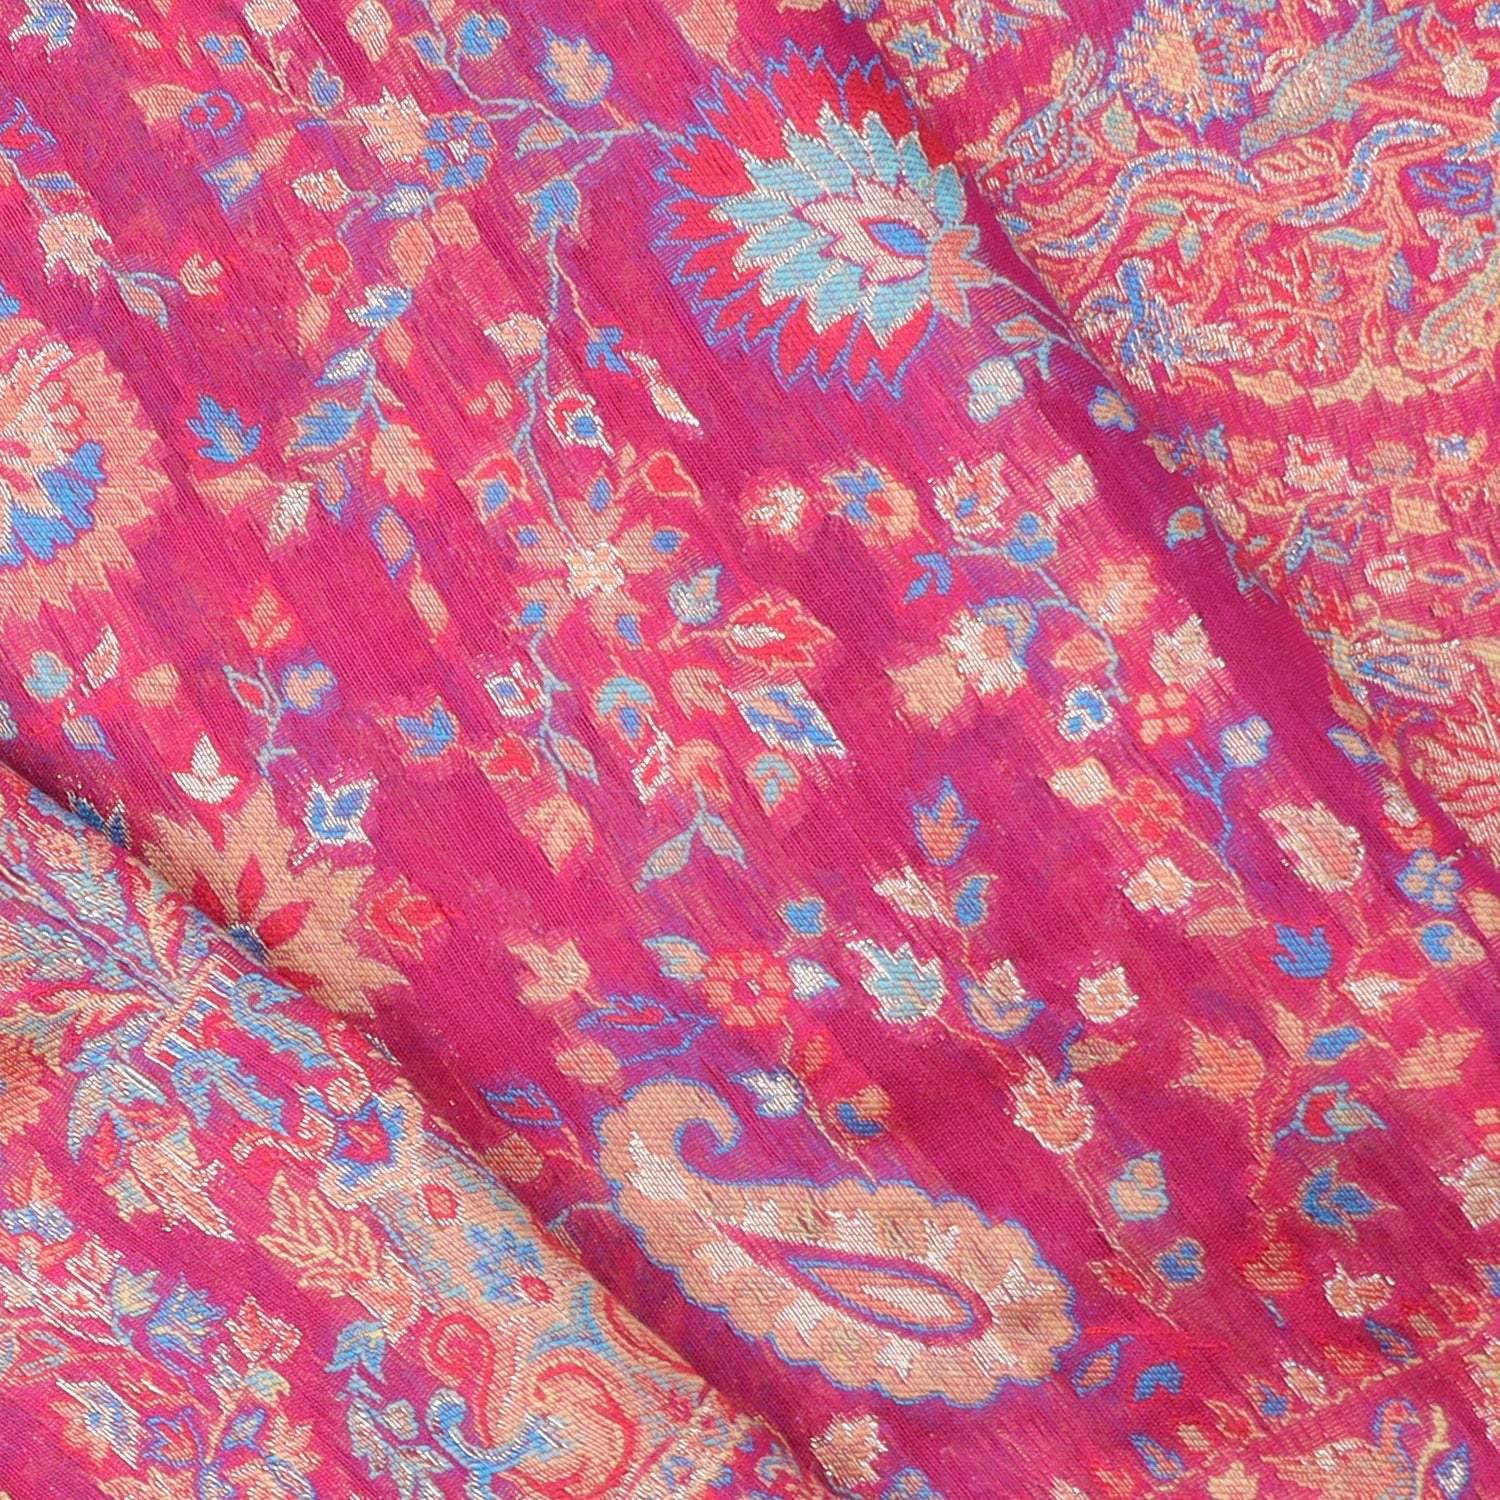 French Pink Kani Silk Handloom Saree With Floral Pattern - Singhania's